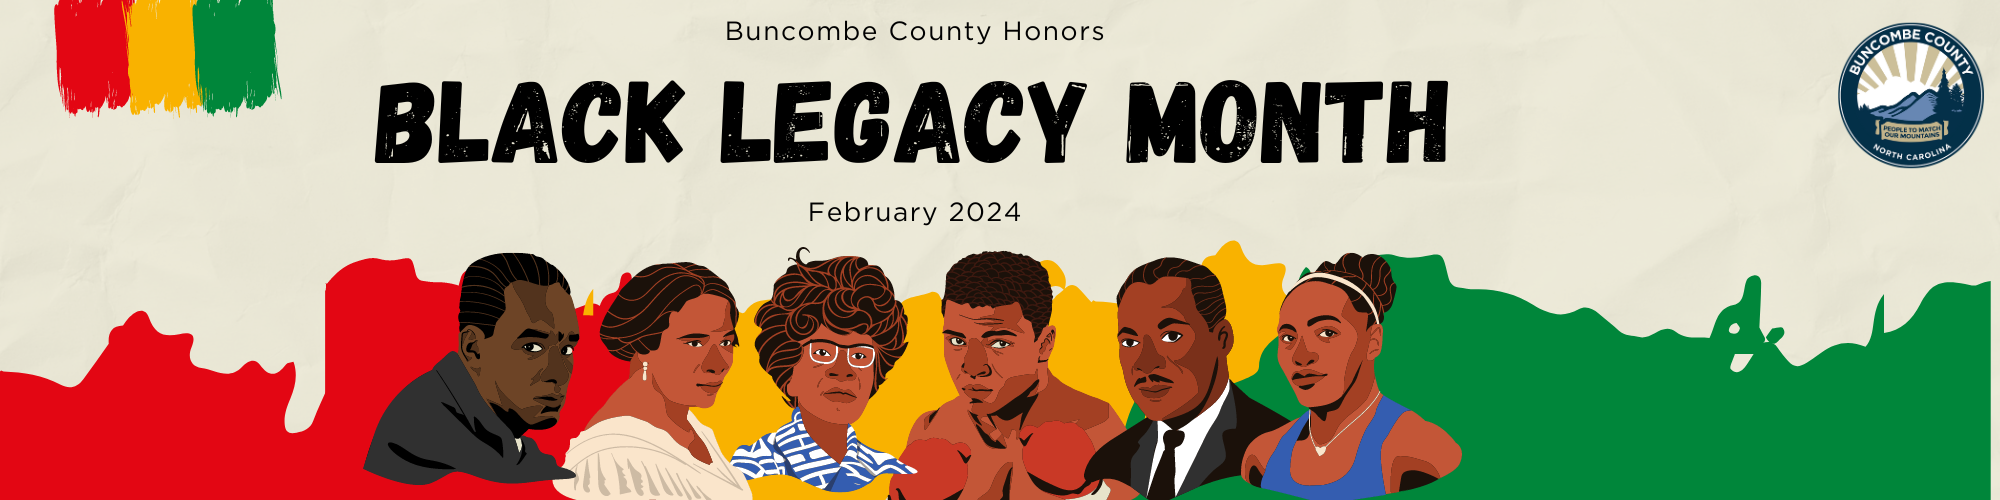 Buncombe County Honors Black Legacy Month - February 2024